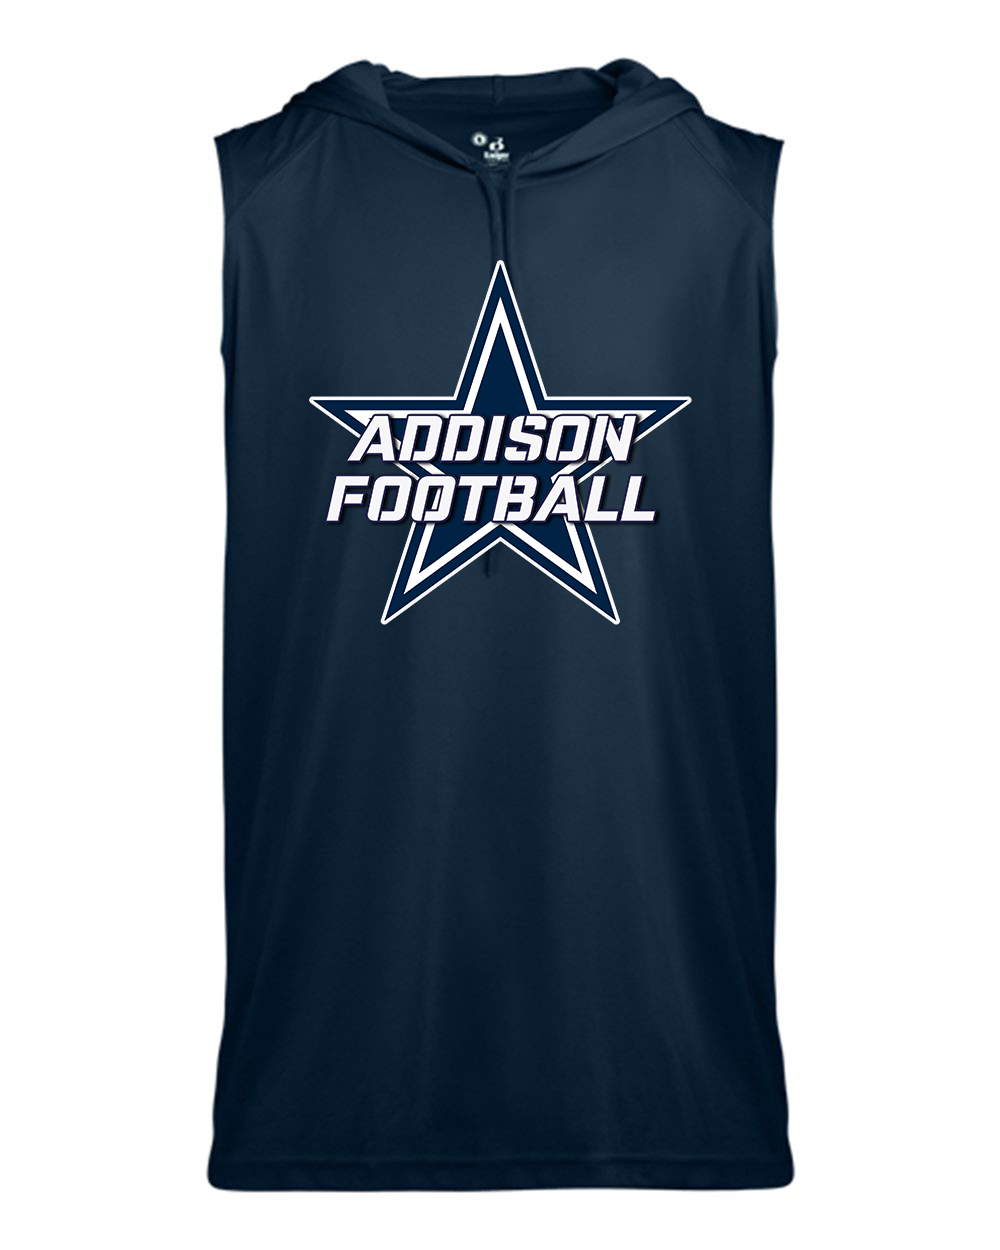 Star Addison Football Hooded Performance Tank - YOUTH